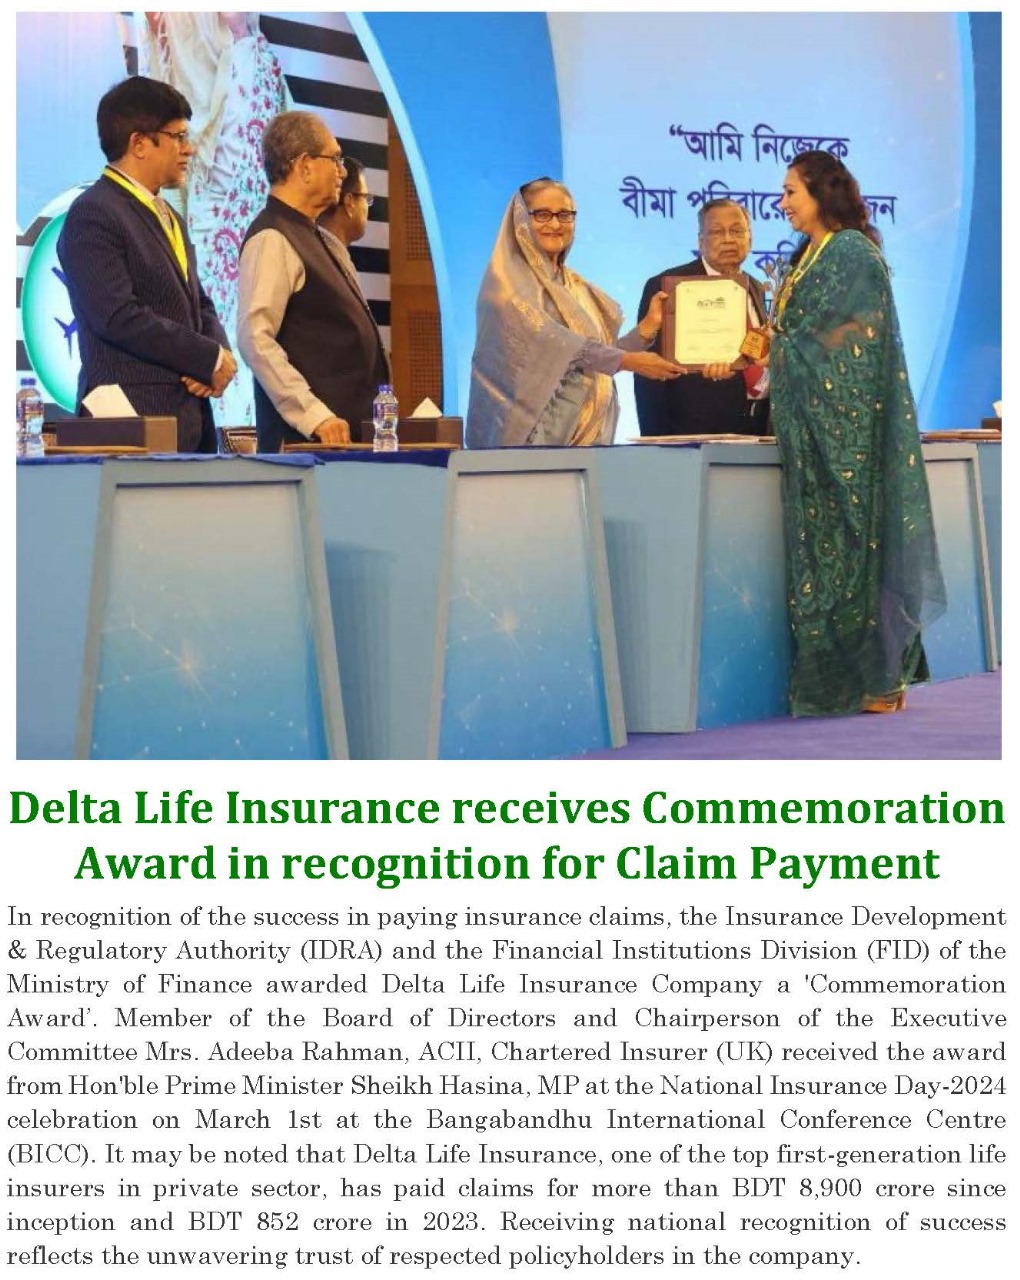 Delta Life Insurance receives Commemoration Award in recognition for Claim Payment